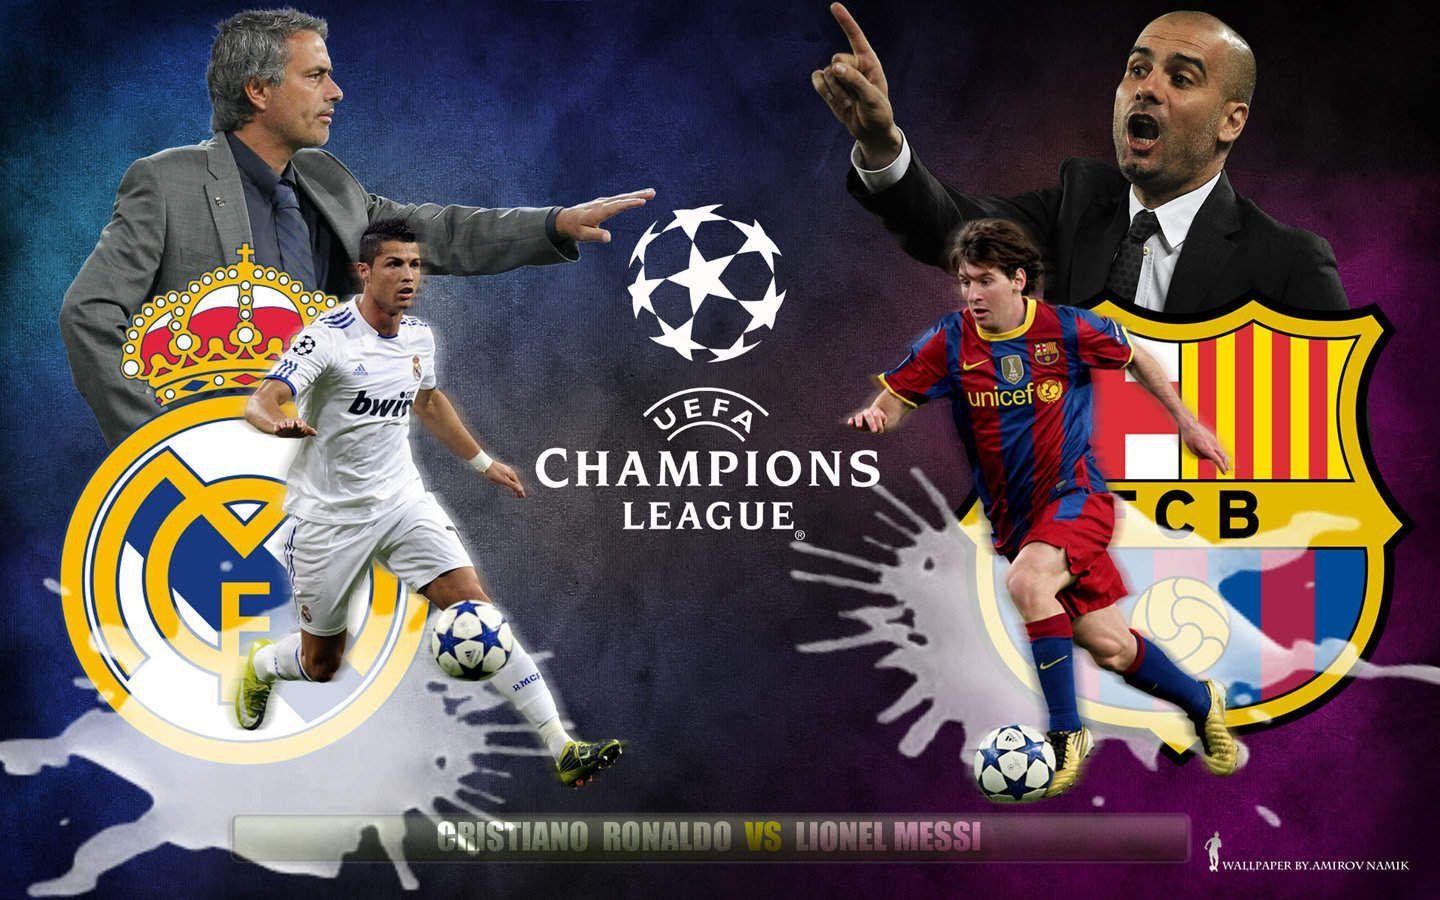 Real Madrid VS Barcelona picture